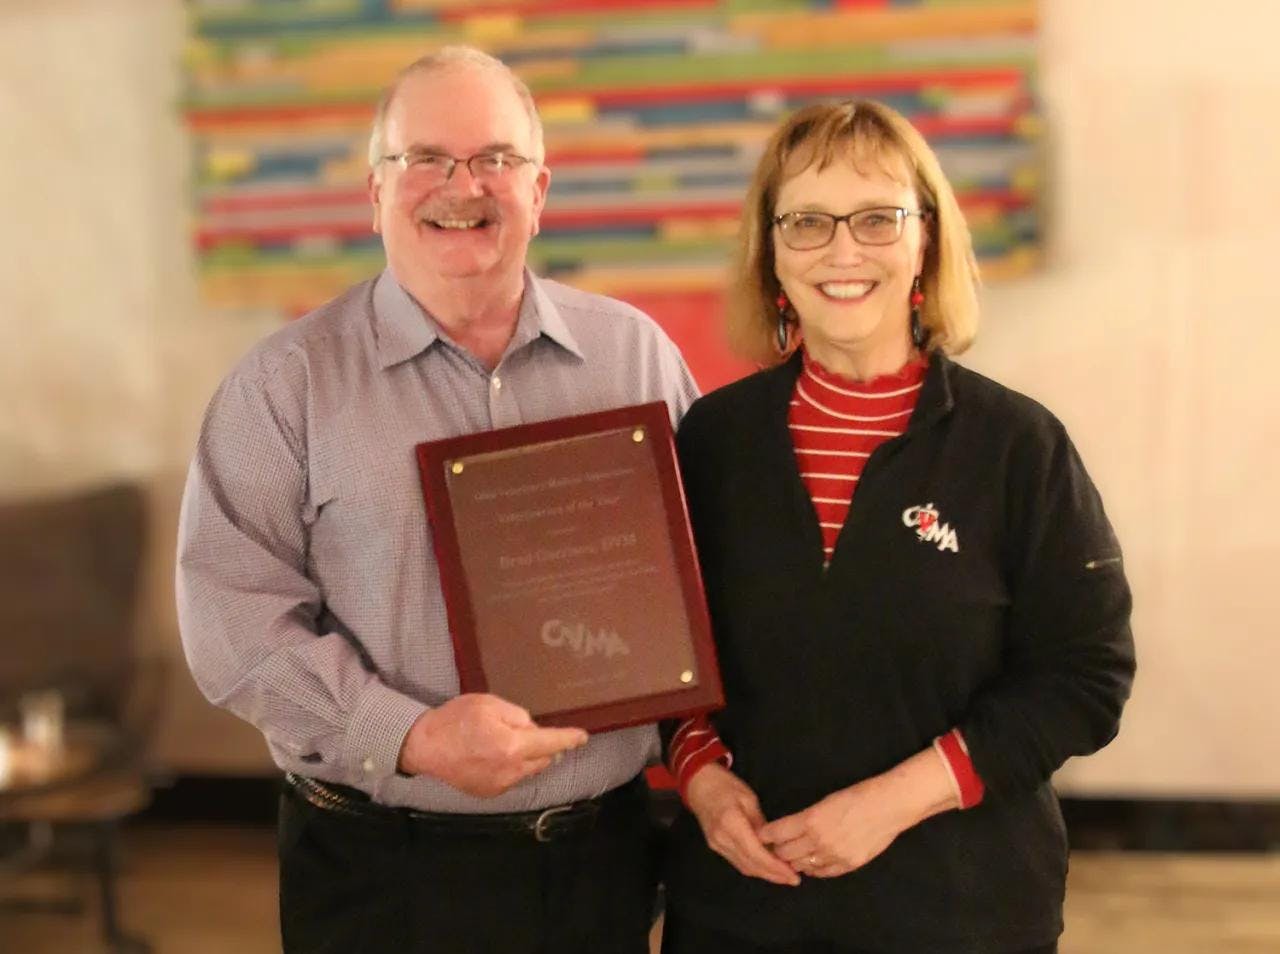 Brad Garrison, DVM, was presented with the 2022 Ohio Veterinarian of the Year Award by Barbara Musolf, DVM. (Photo courtesy of OVMA)